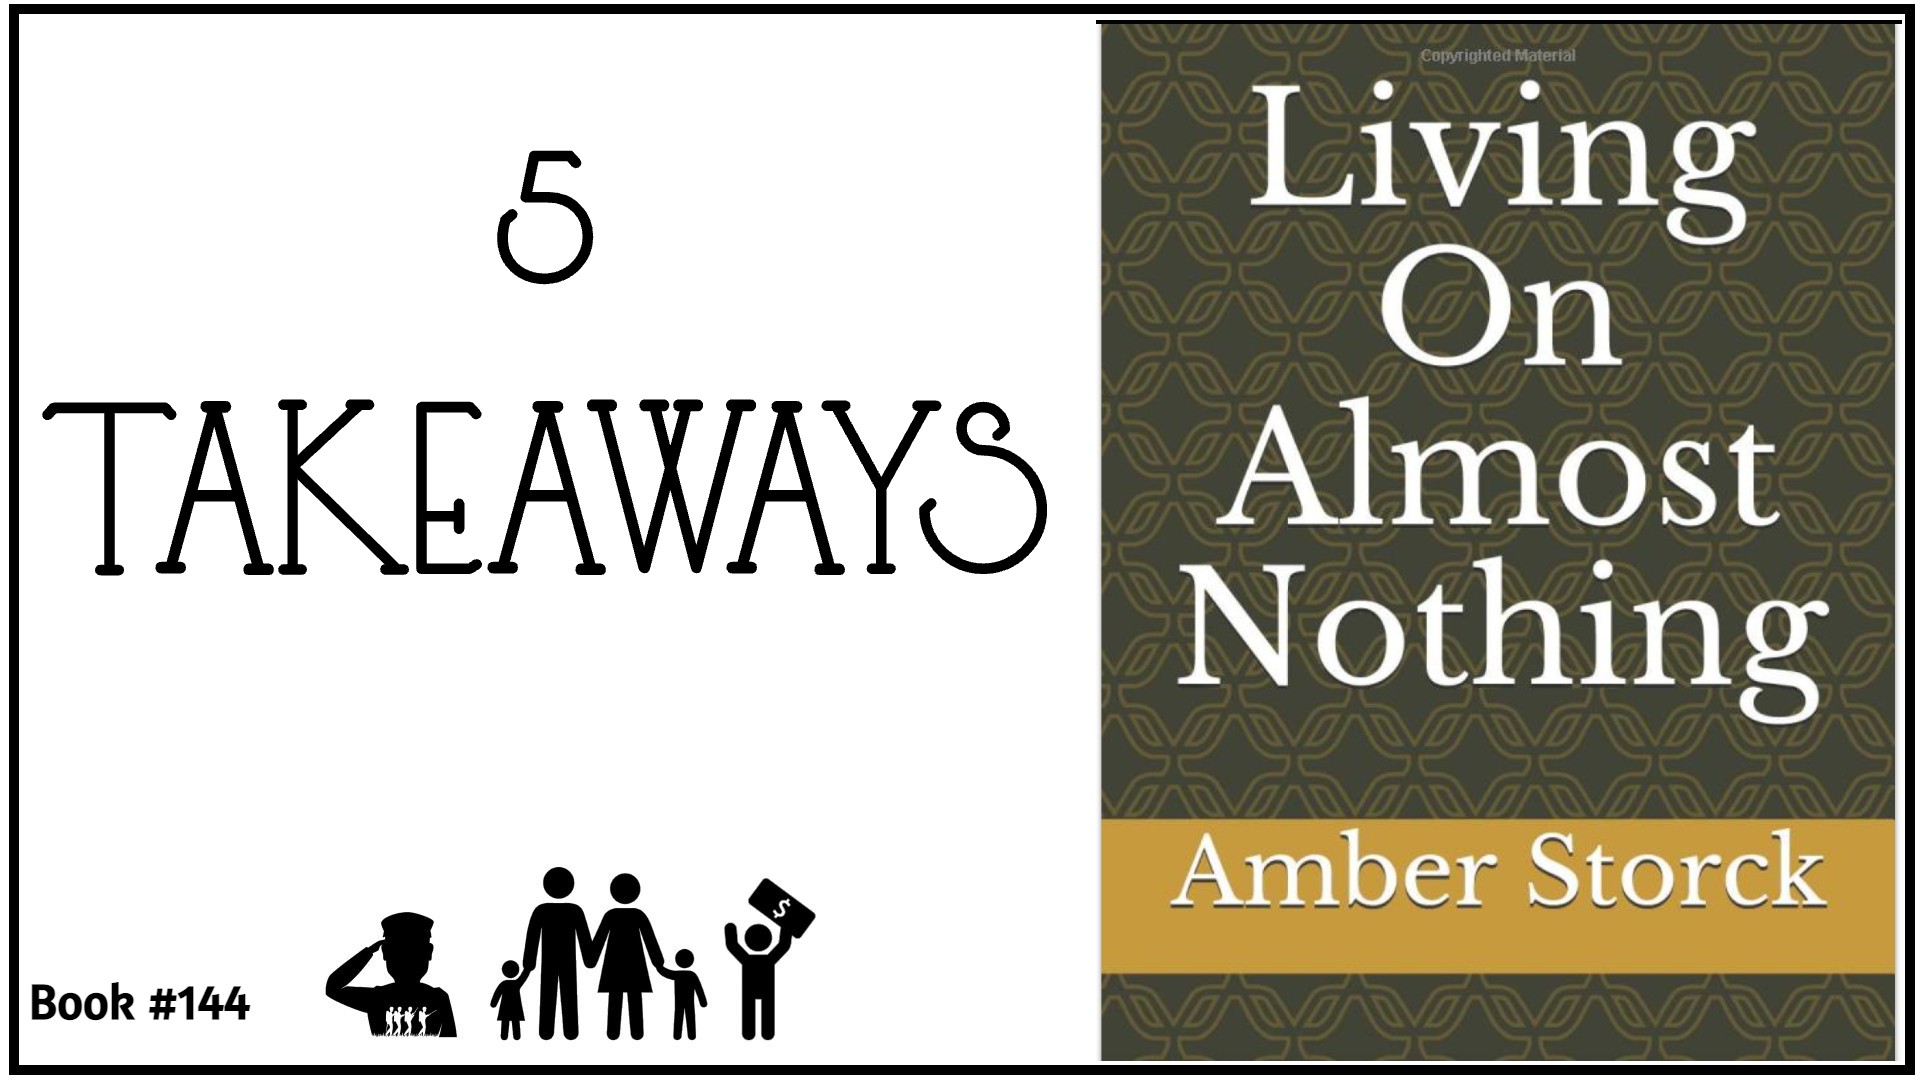 5 Takeaways from “Living on Almost Nothing”